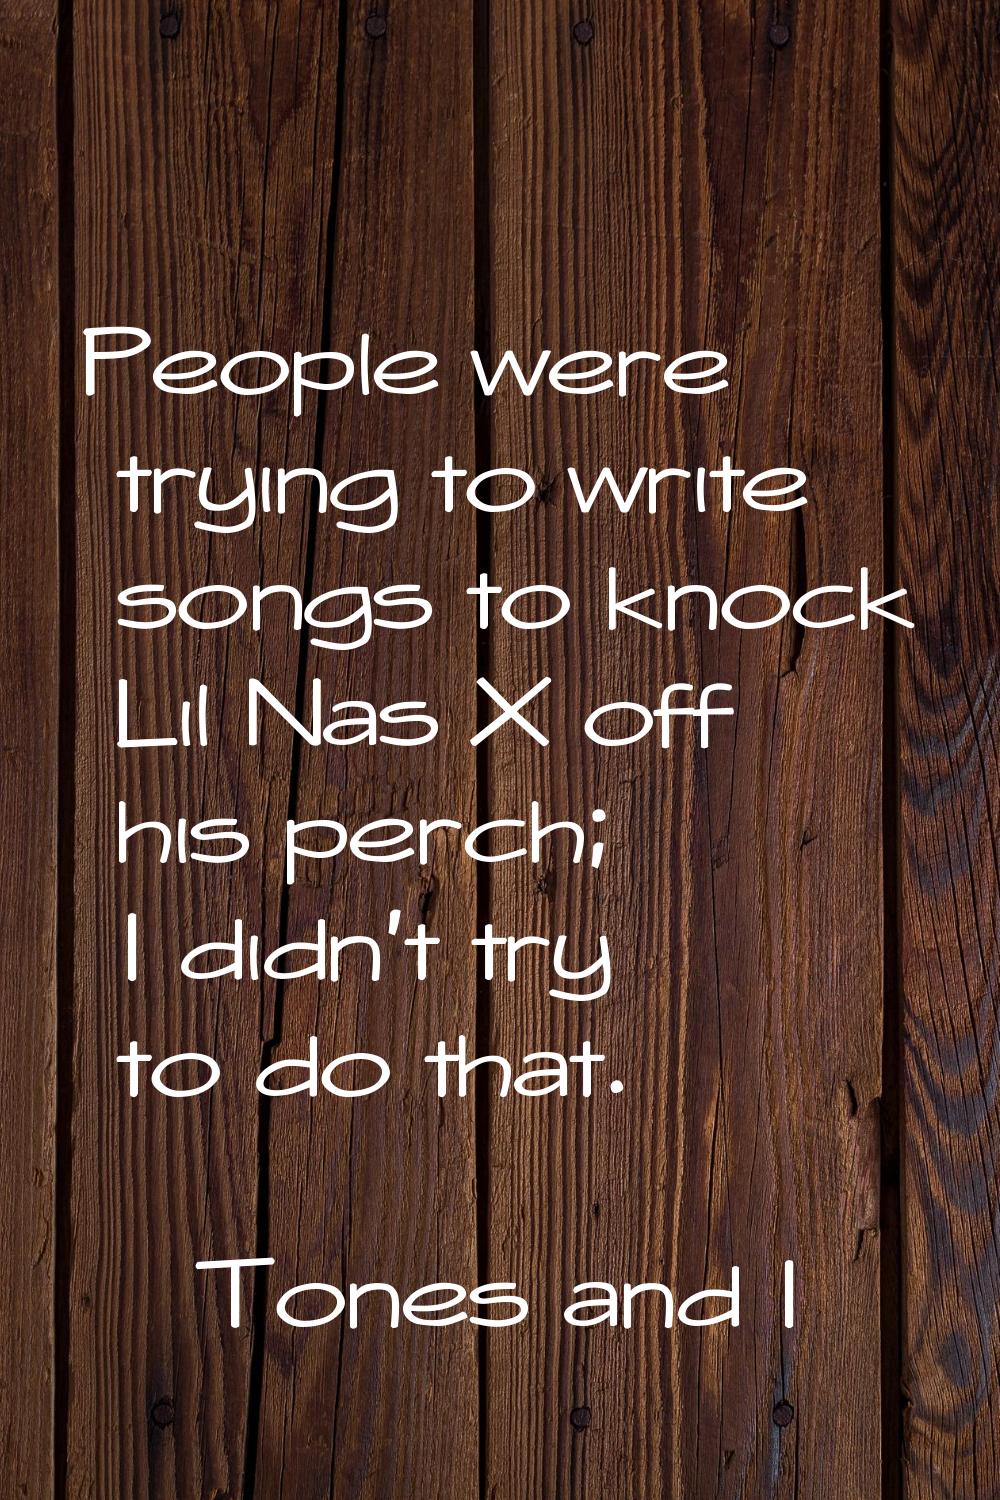 People were trying to write songs to knock Lil Nas X off his perch; I didn't try to do that.